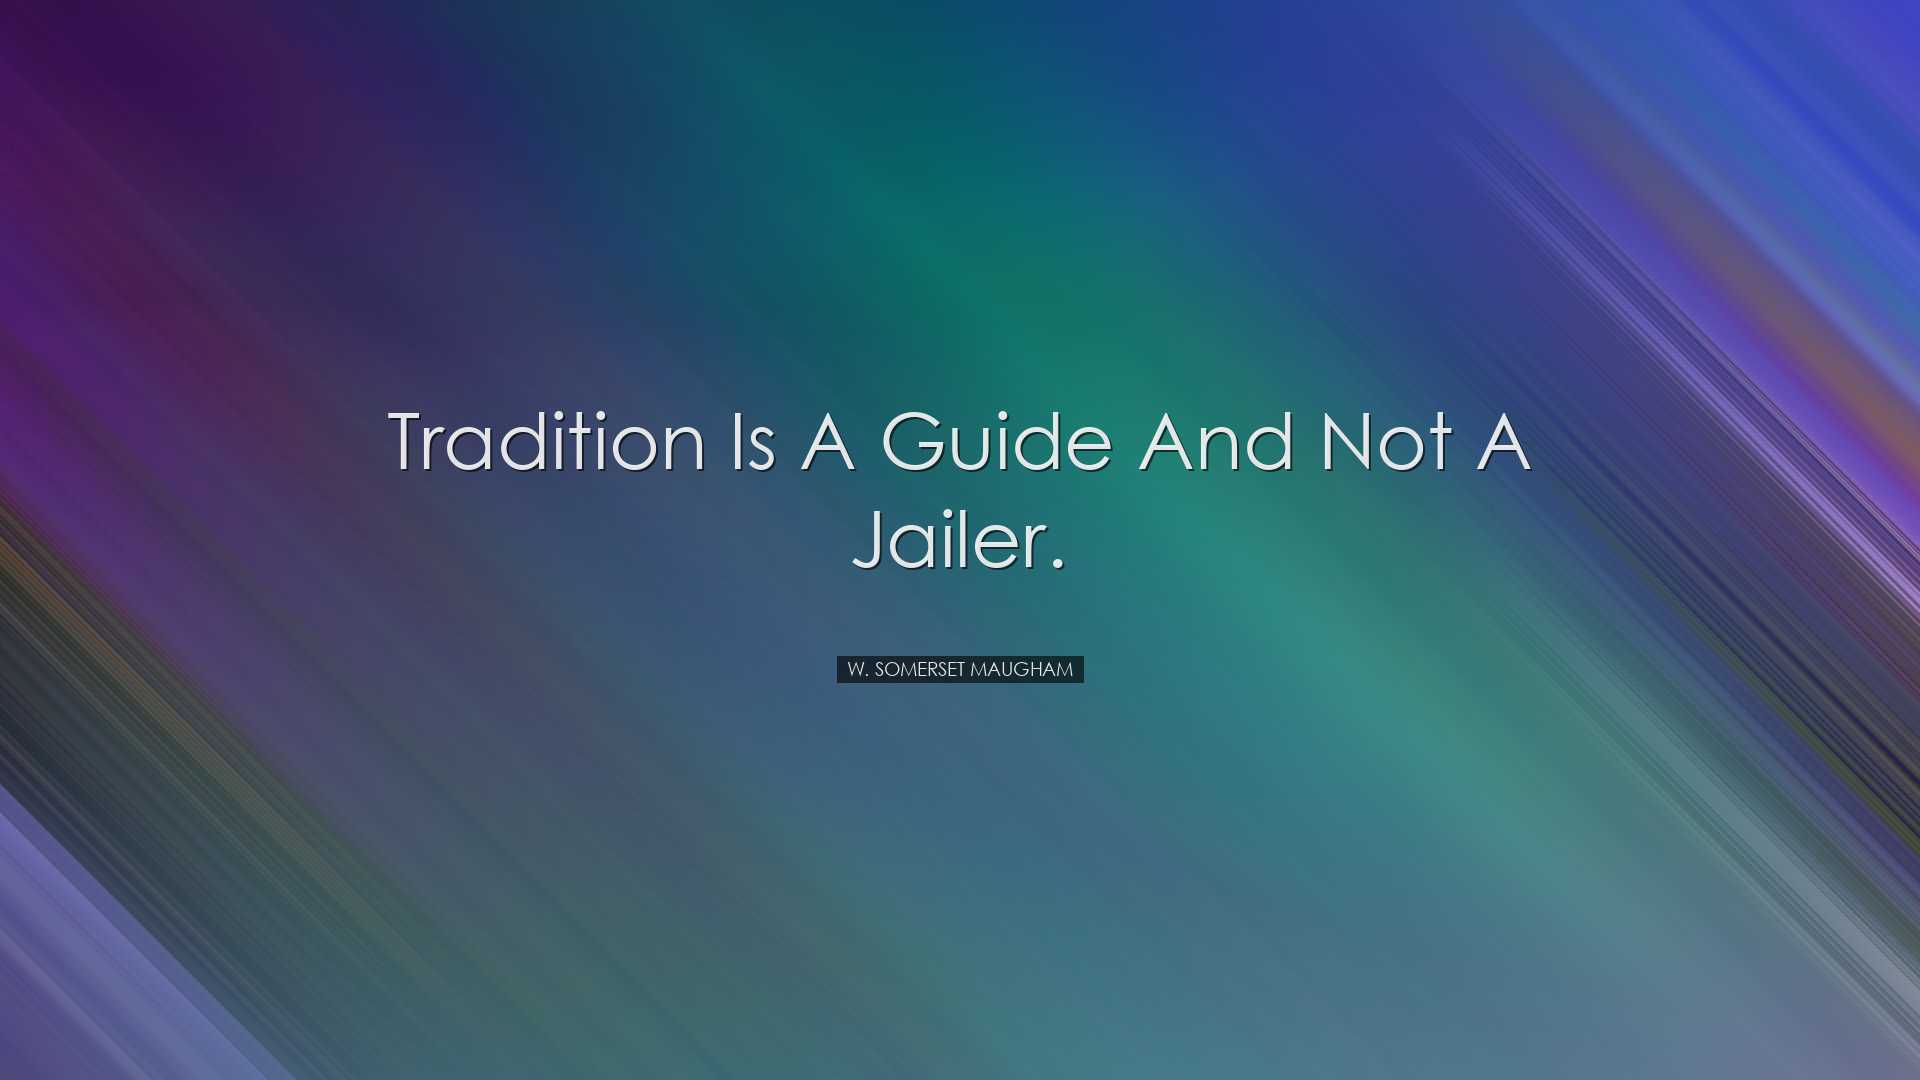 Tradition is a guide and not a jailer. - W. Somerset Maugham